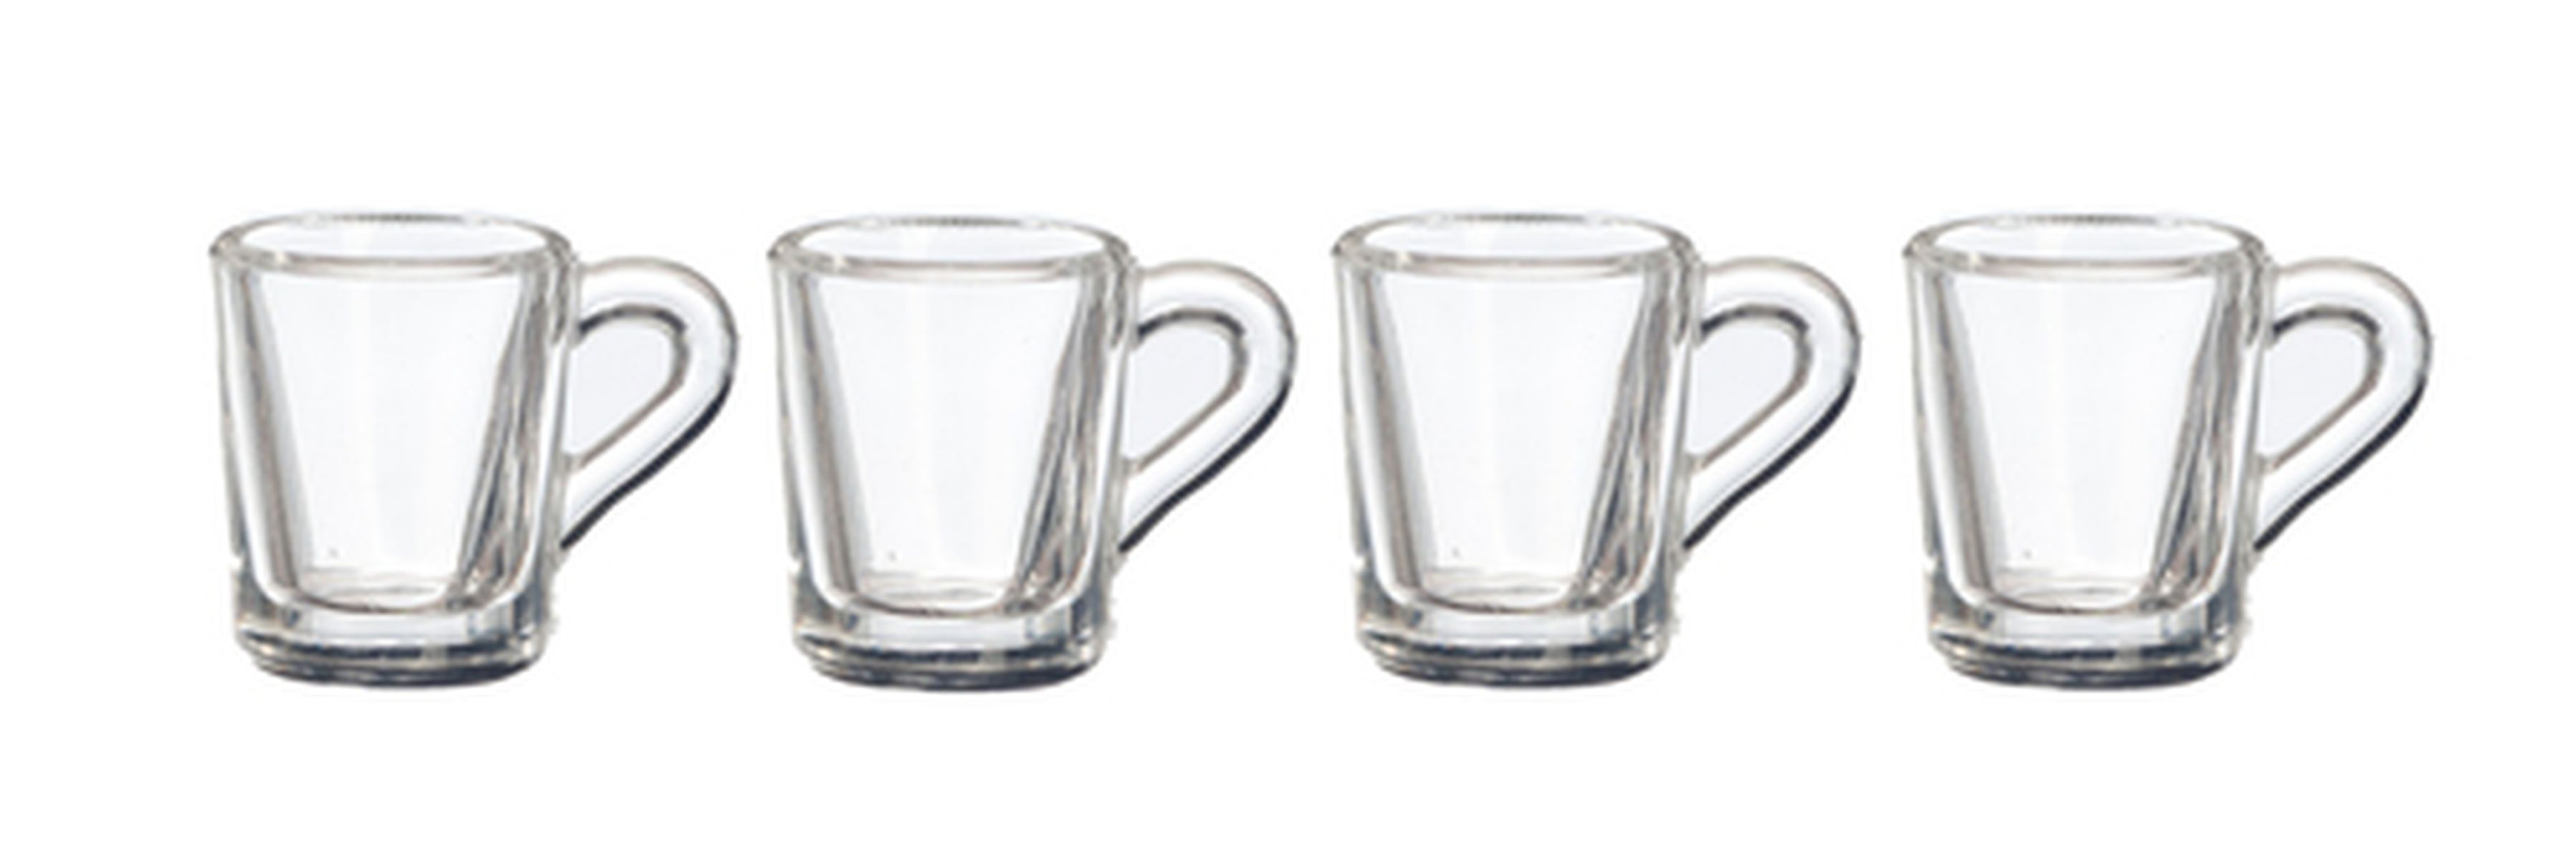 Set of 4 Clear Mugs by Miniatures World